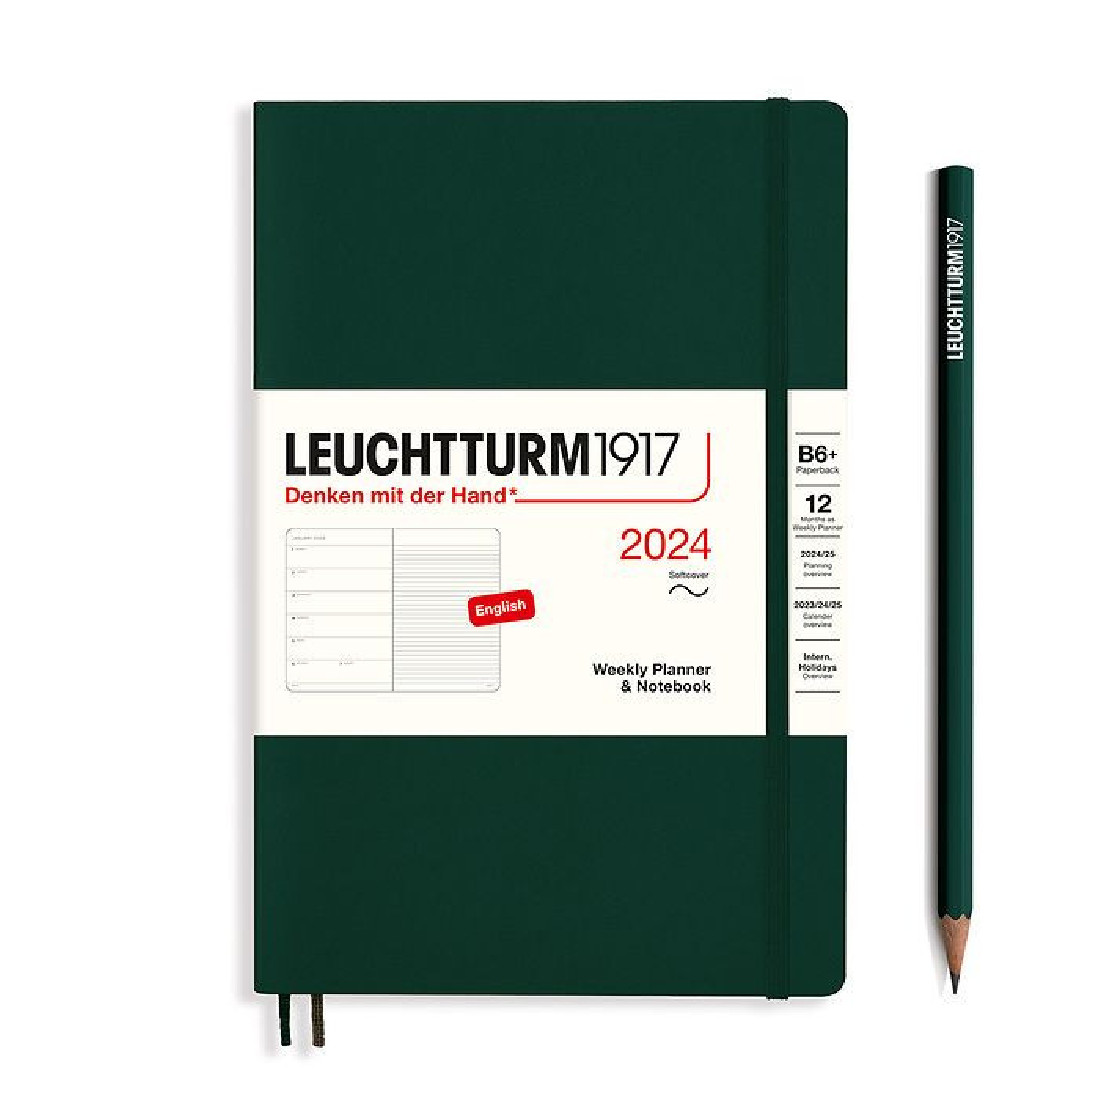 Leuchtturm 1917 Weekly Planner and Notebook 2024 Forest Green Paperback B6 Plus Soft Cover